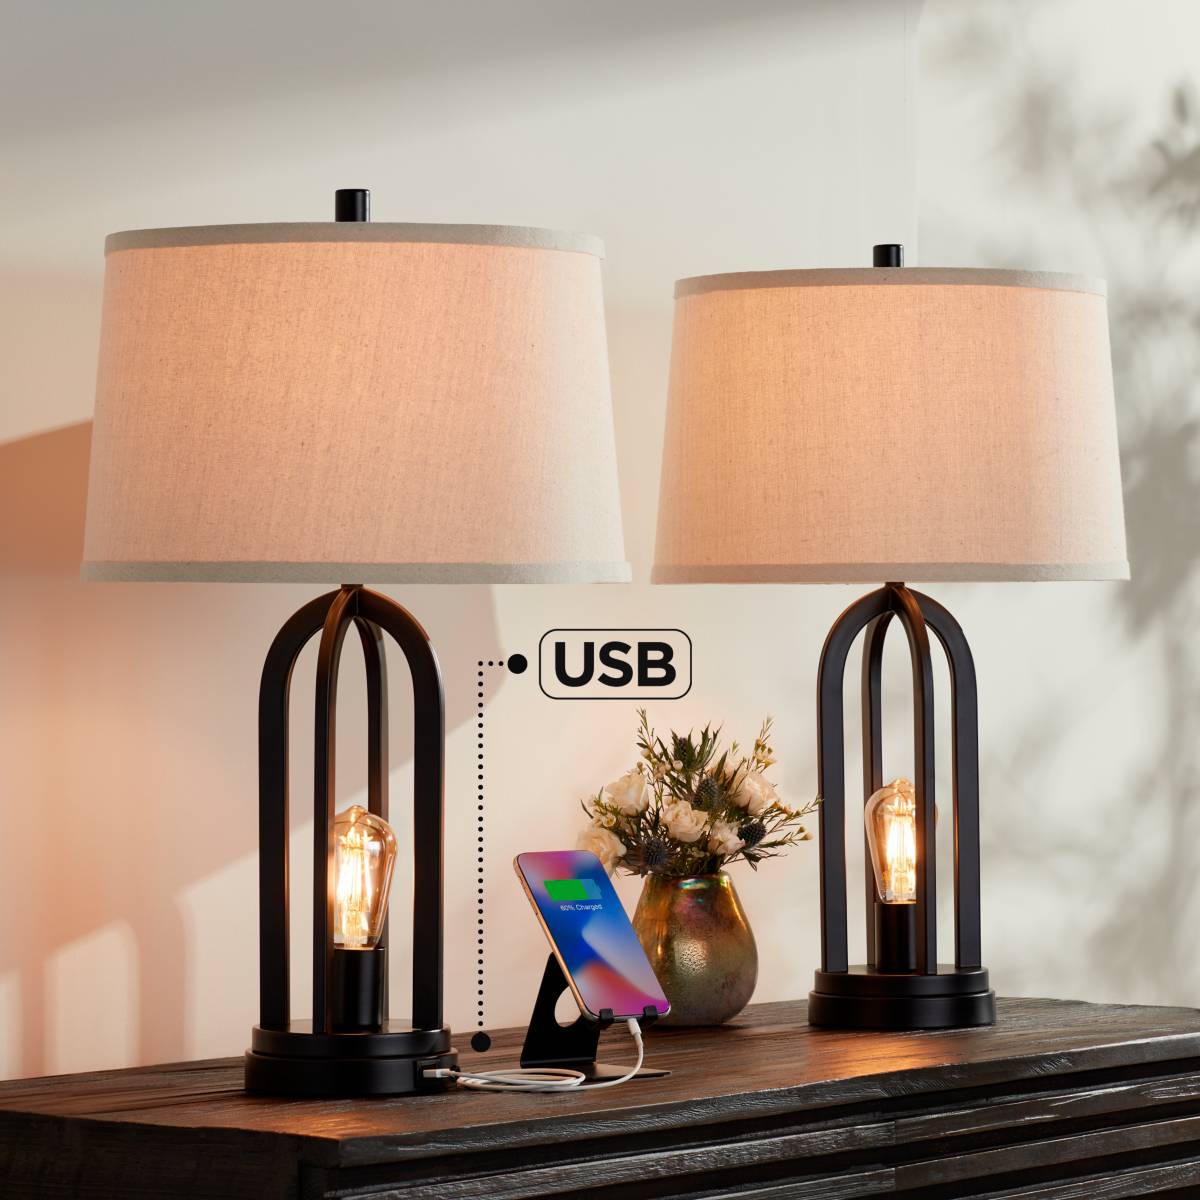 Usb Table Lamps Featuring Built In, Night Table Lamp With Usb Port